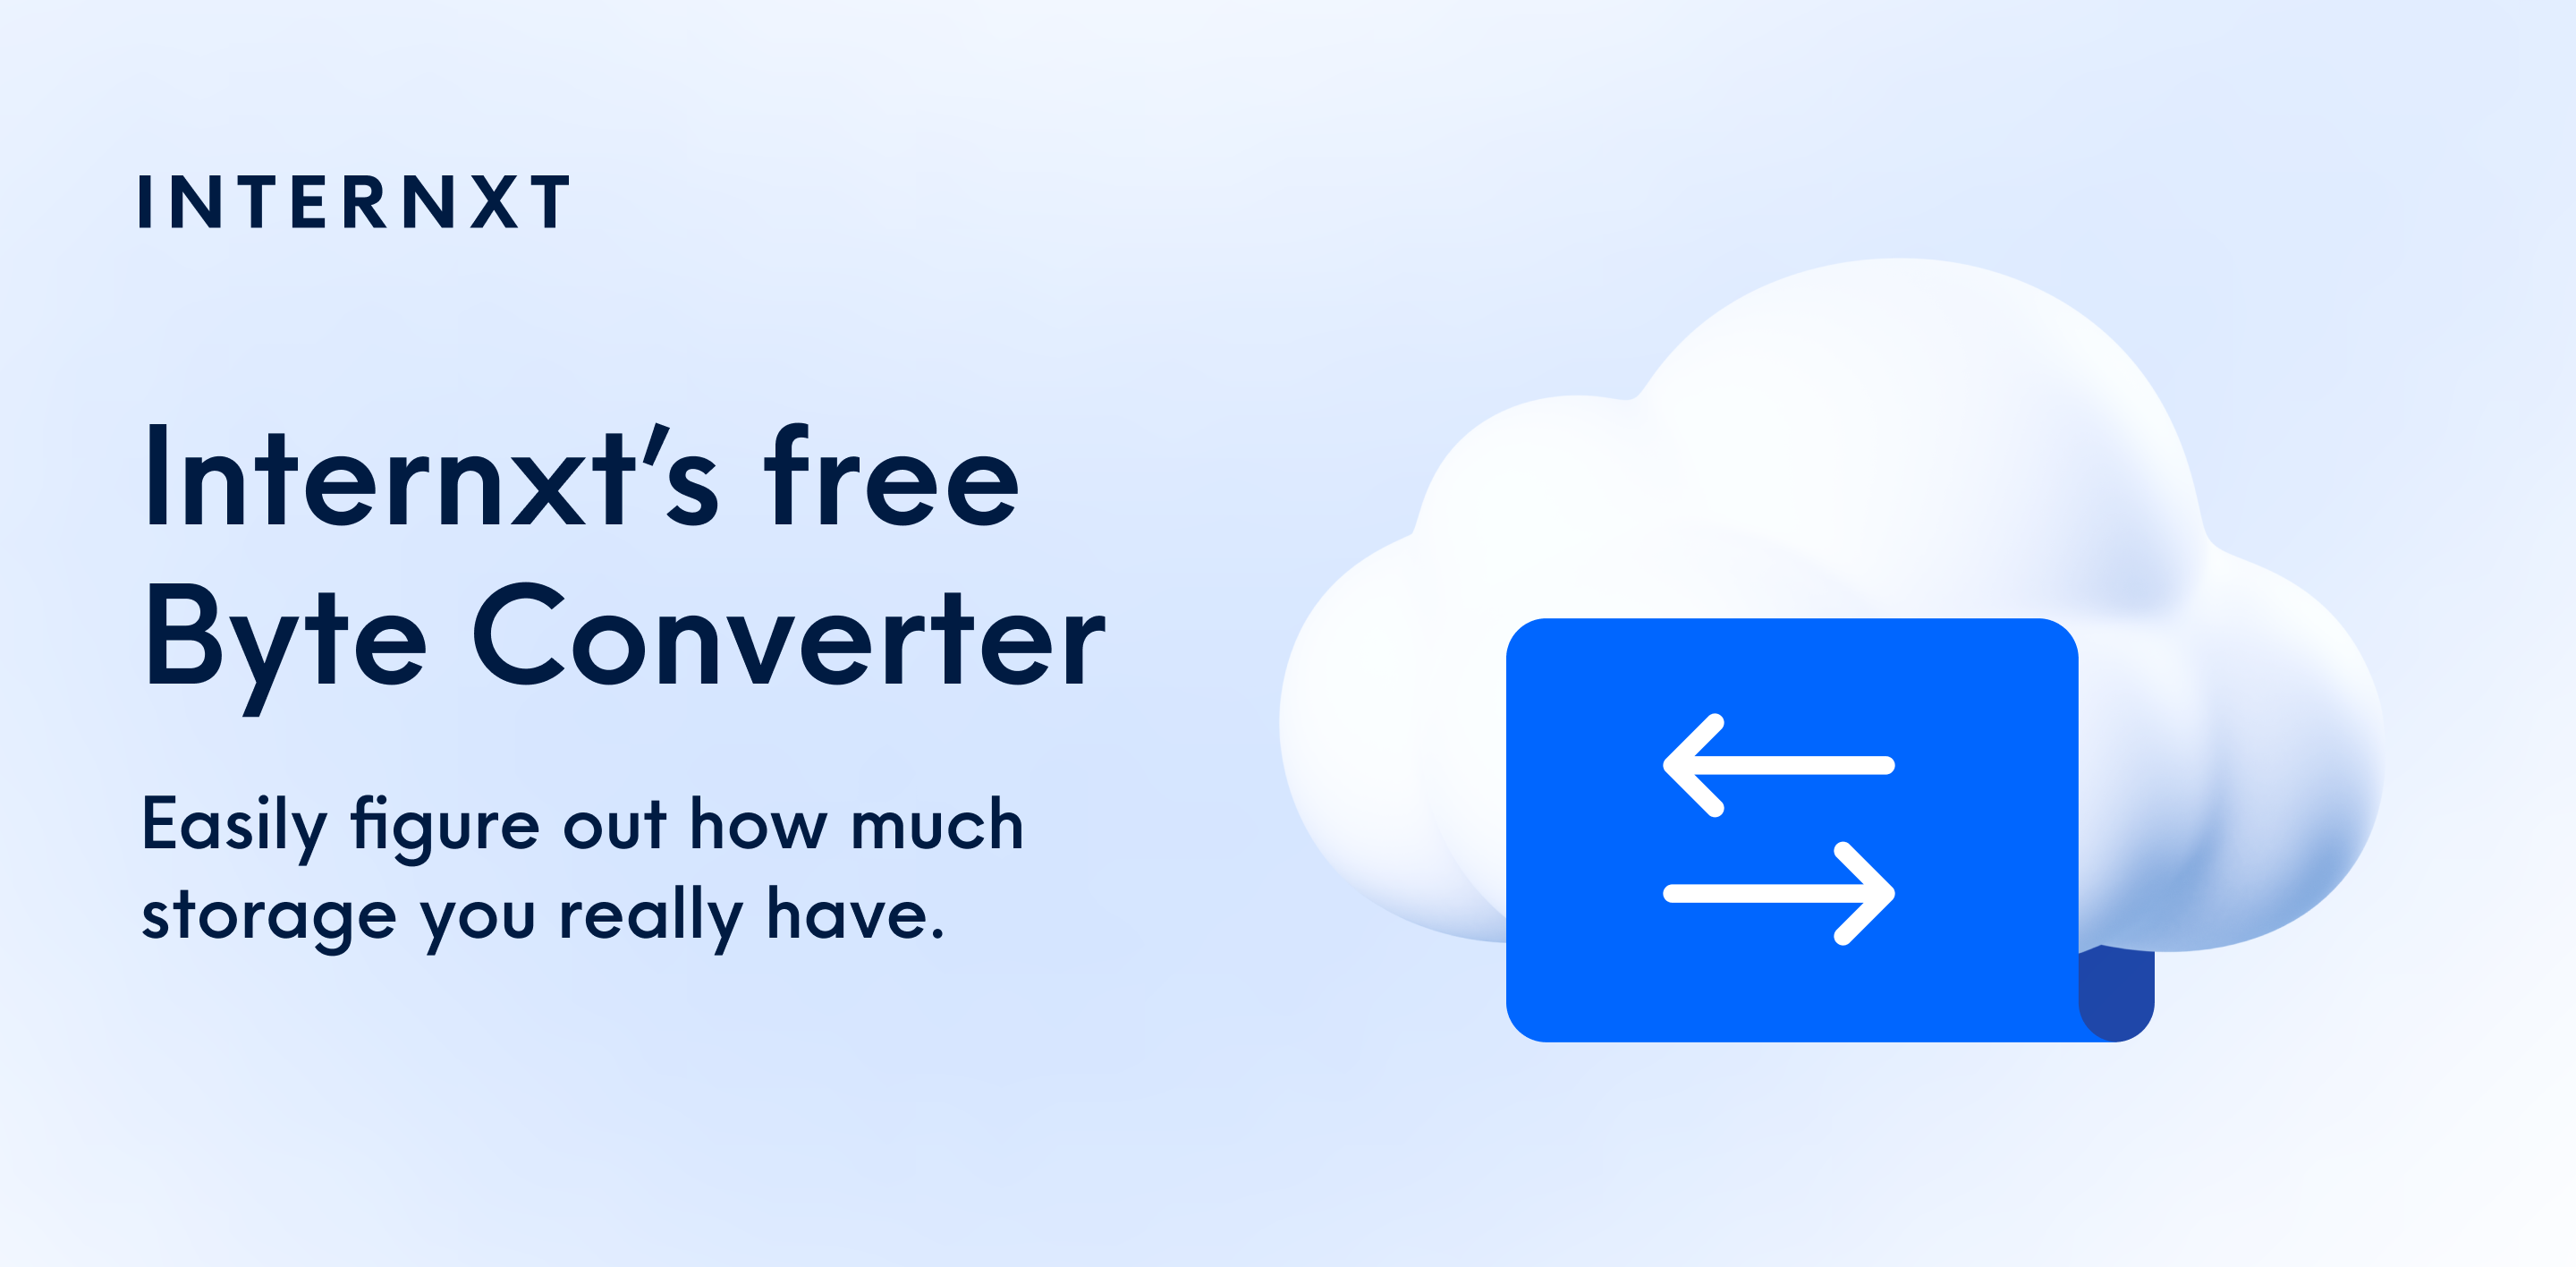 Internxt Byte Converter helps you convert GB to TB & more